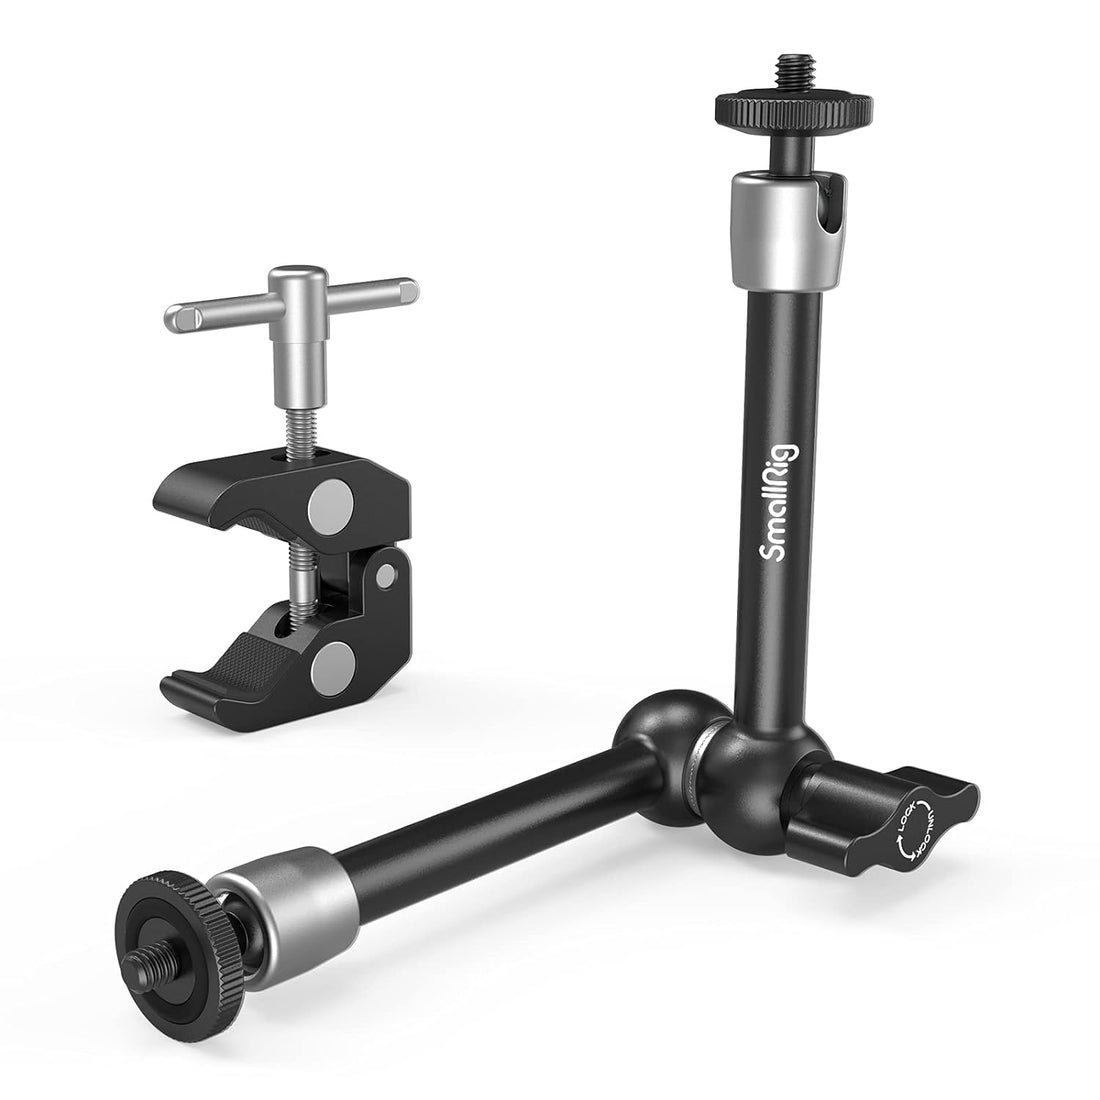 SmallRig Clamp w/ 1/4" and 3/8" Thread and 5.8 Inches Adjustable Friction Power Articulating Magic Arm with 1/4" Thread Screw for LCD Monitor/LED Lights - KBUM2730